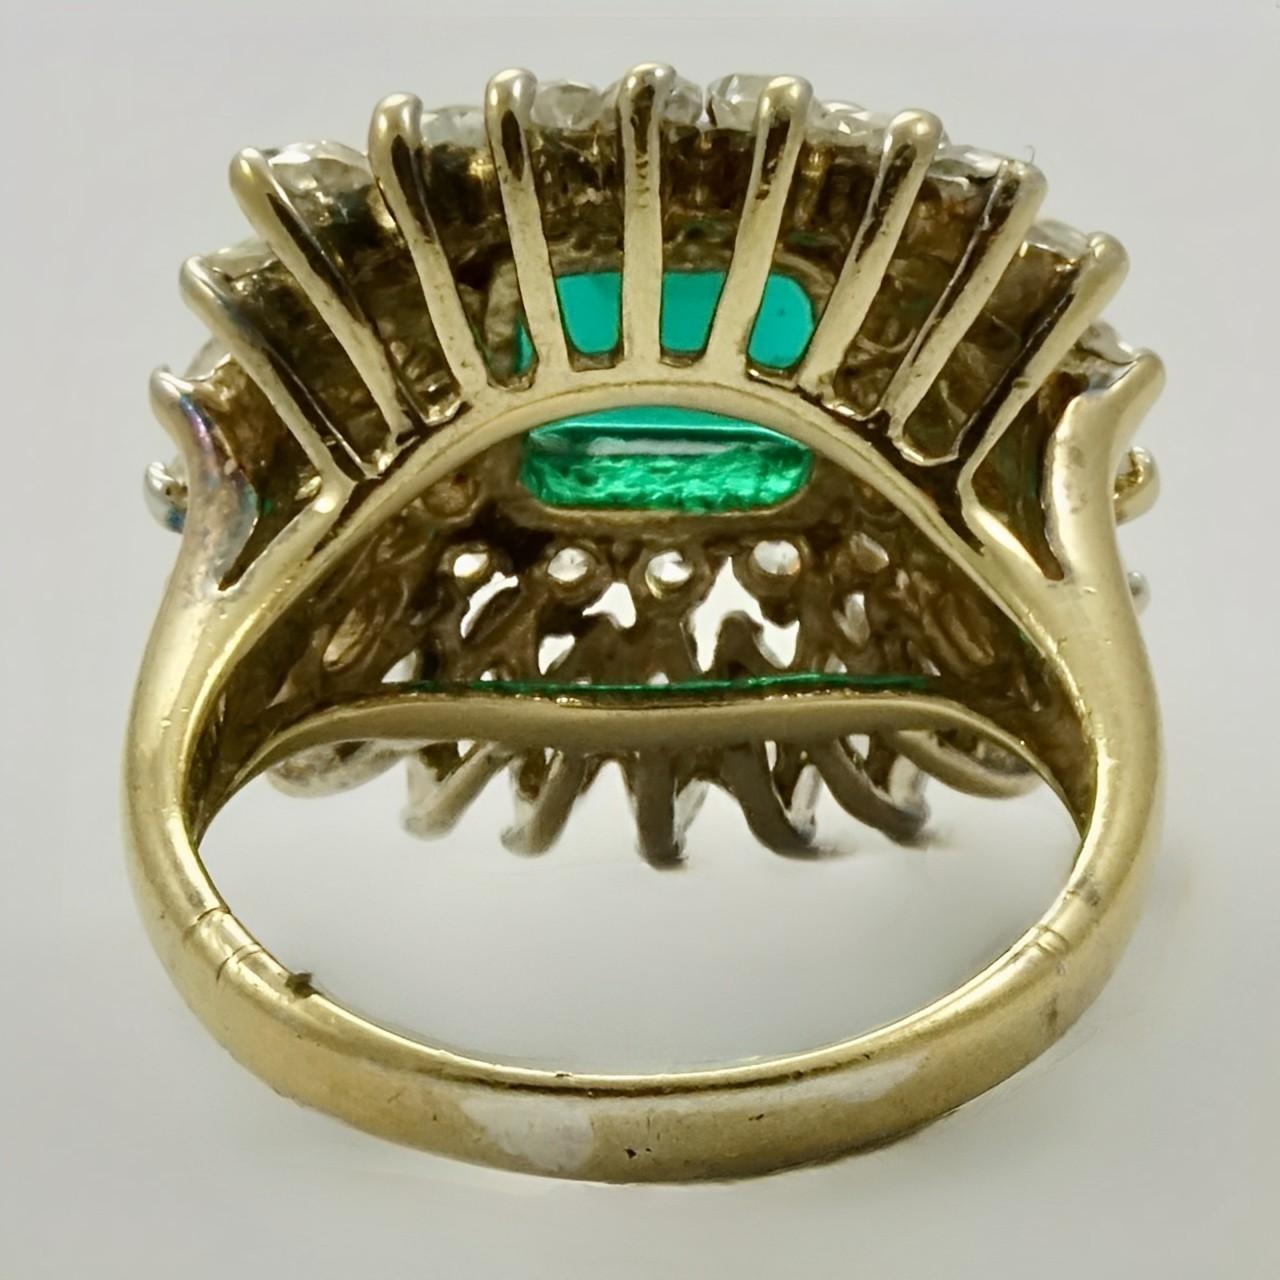 Gold Vermeil on Sterling Silver Rhinestone Cocktail Ring circa 1950s In Good Condition For Sale In London, GB